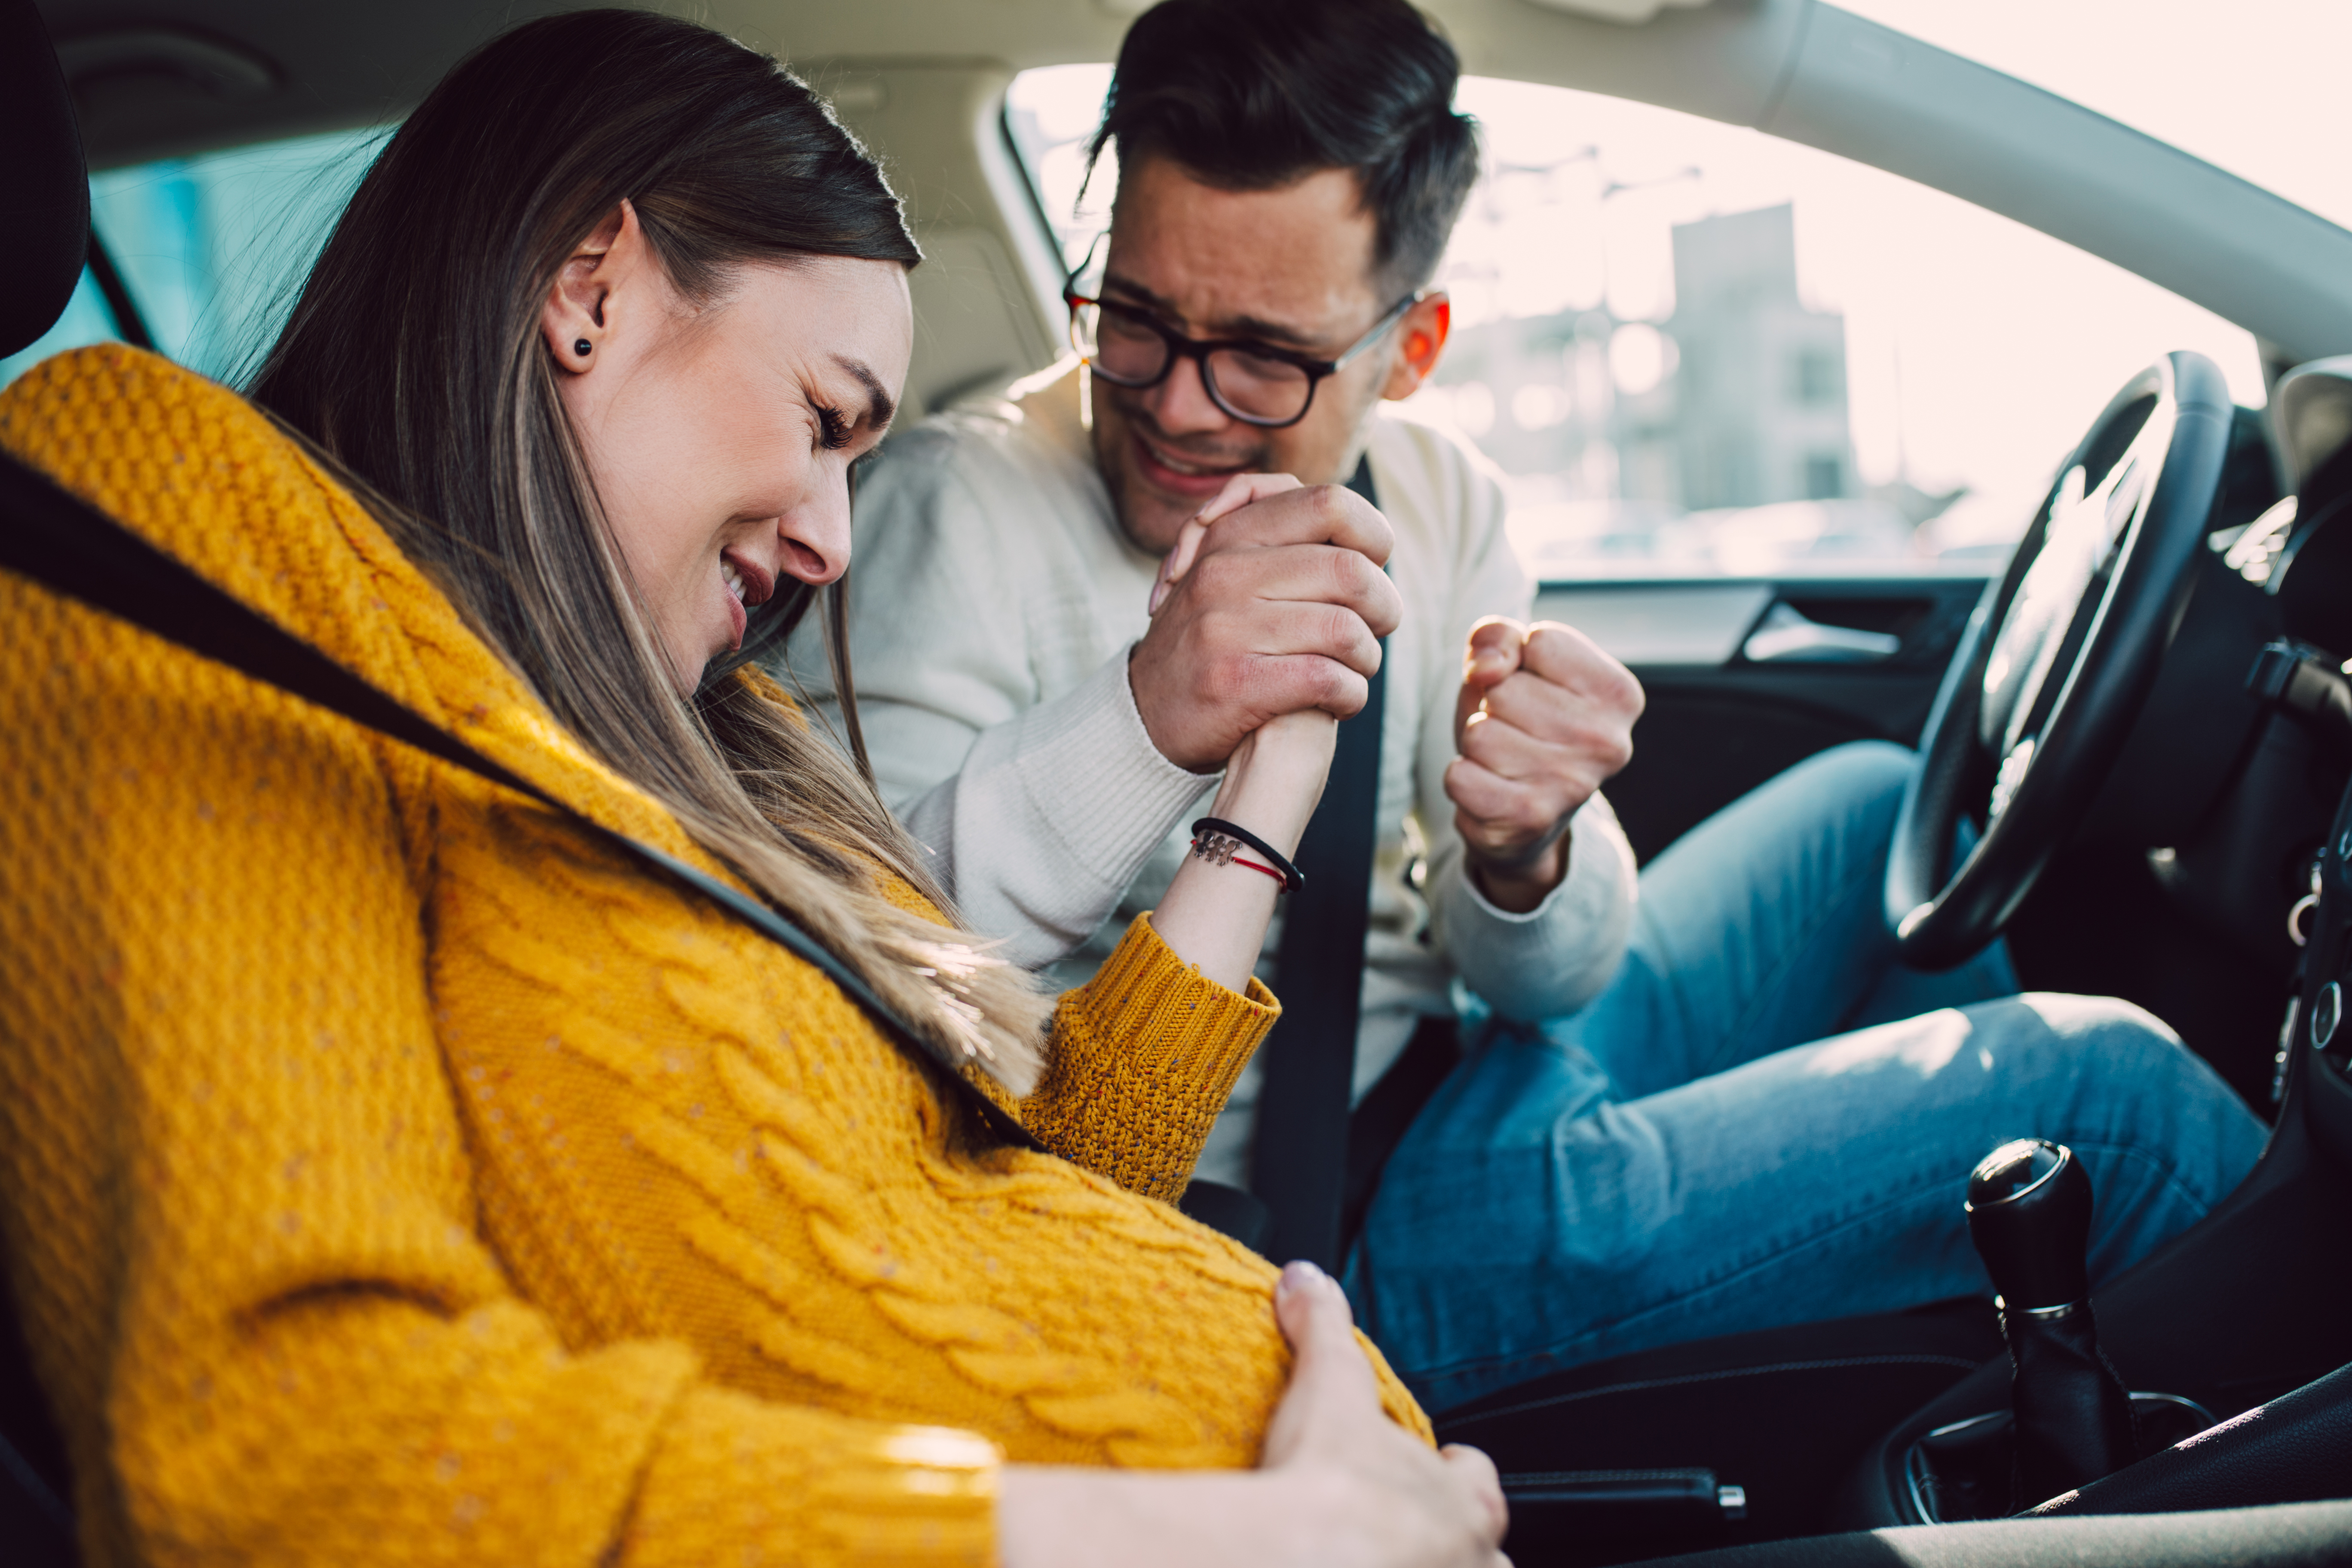 Pregnant woman starting to feel pain and contractions while her worried husband driving a car | Source: Shutterstock